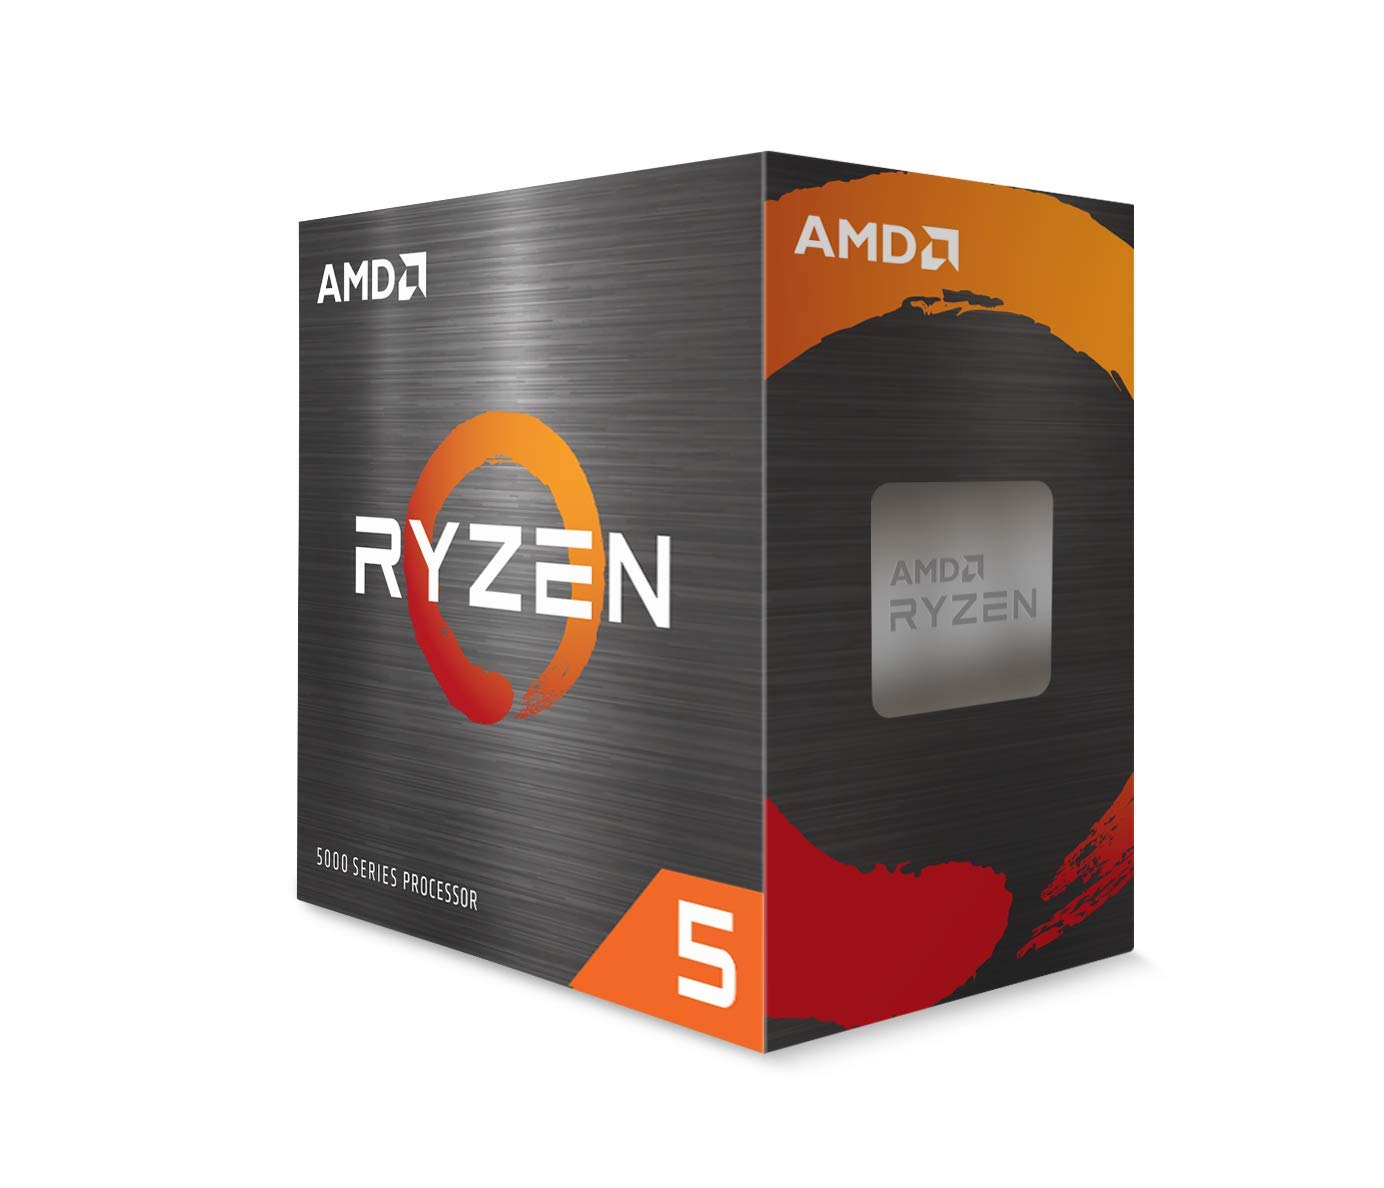 AMD Ryzen 5 5500, 6-Core/12 Threads UNLOCKED, Max Freq 4.20GHz, 19MB Cache Socket AM4 65W, With Wraith Stealth cooler